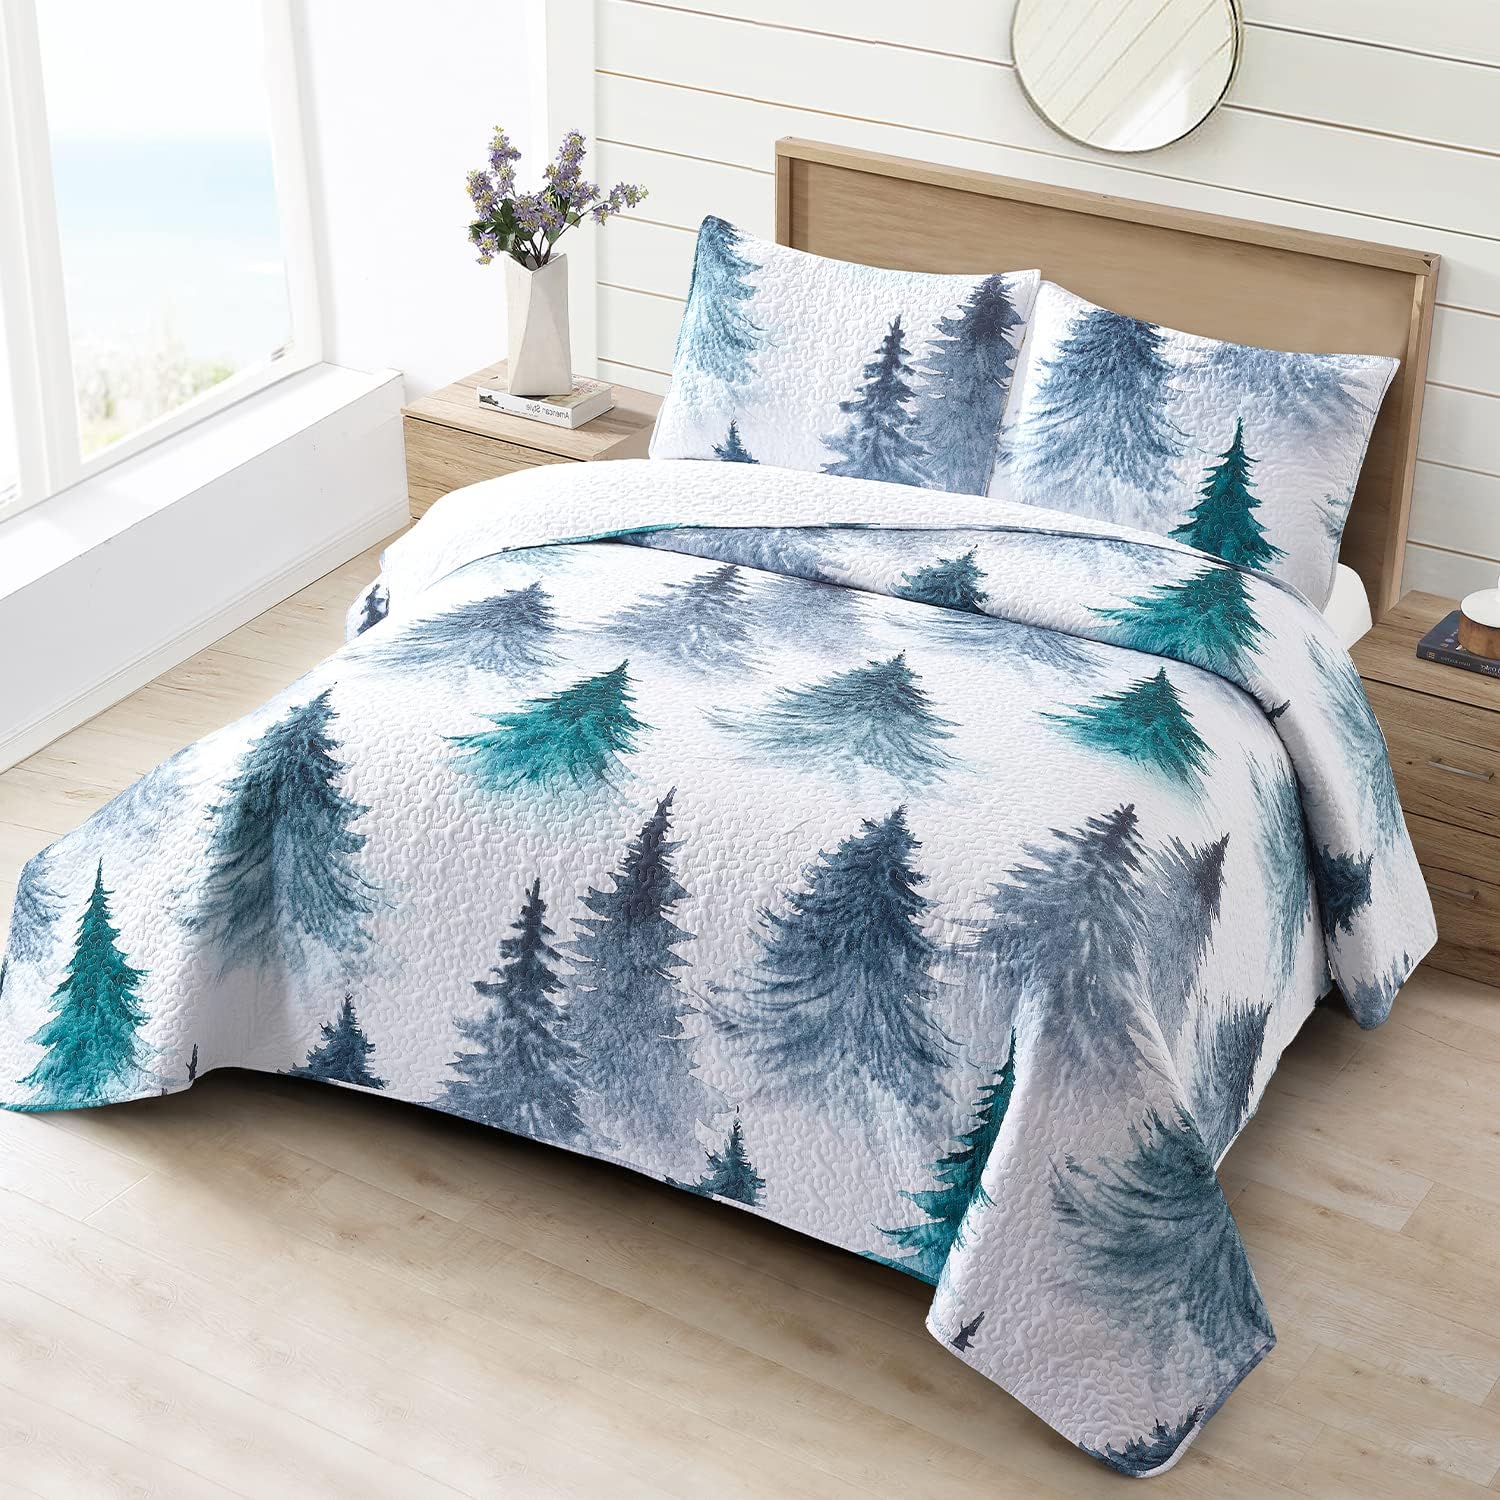 NIUDÉCOR HOME Christmas Quilt Set Queen Size: A Festive and Comfortable Addition to Your Bedroom Decor